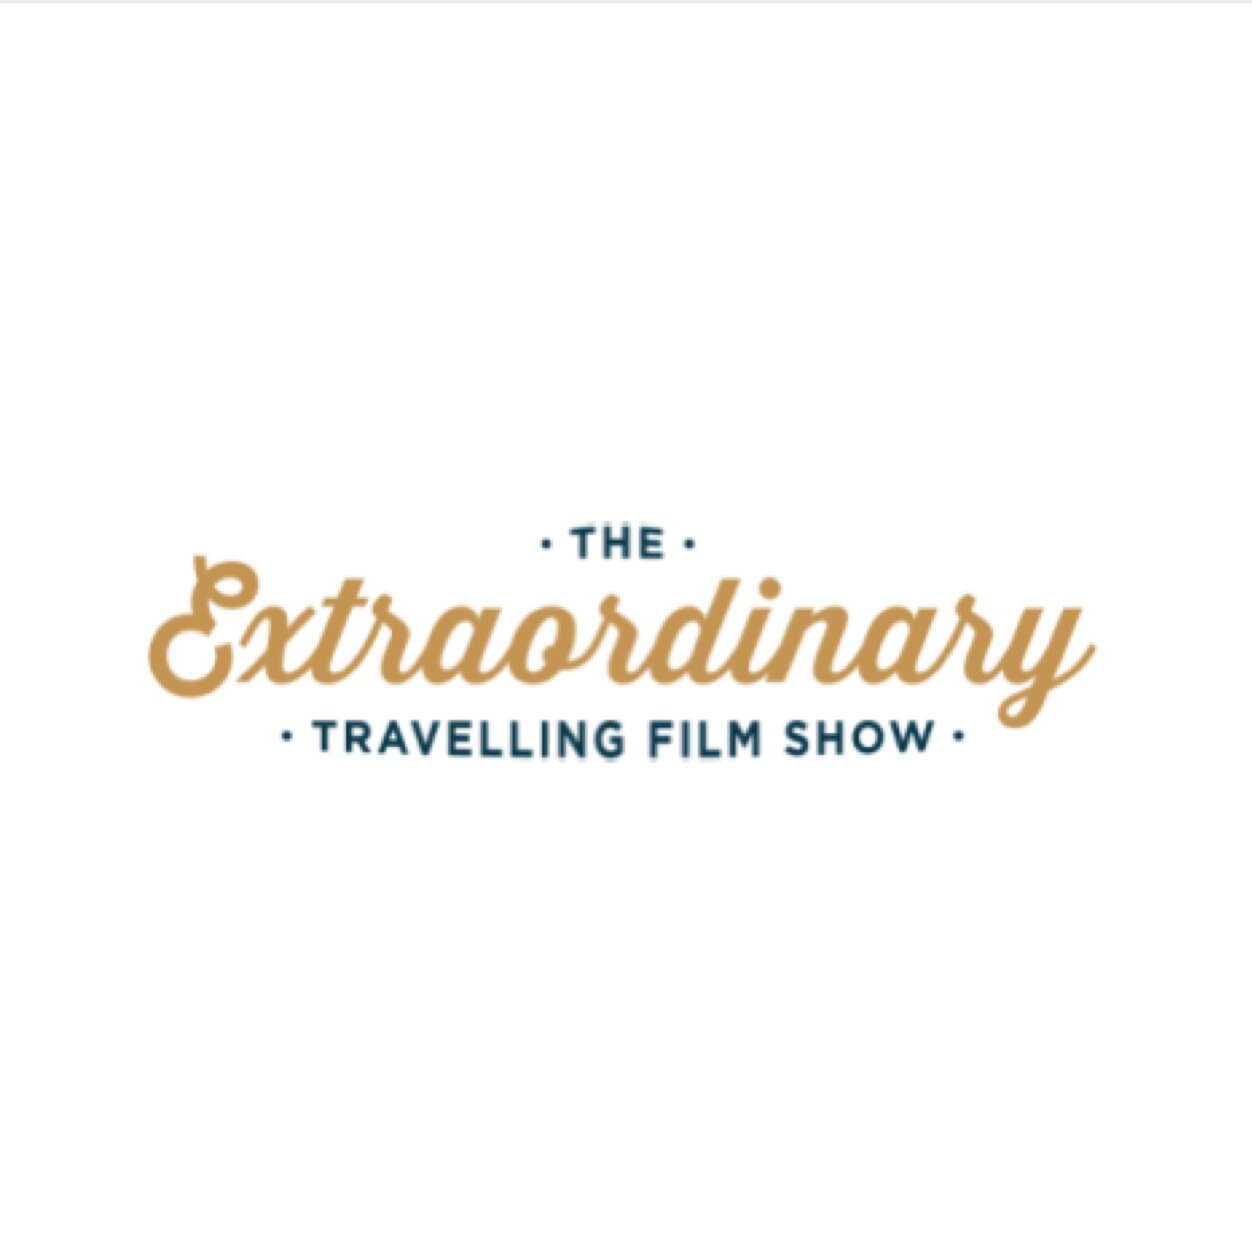 The Extraordinary Travelling Film Show. Showing great films in unique locations throughout the UK... #film #exhibition #outdoorcinema